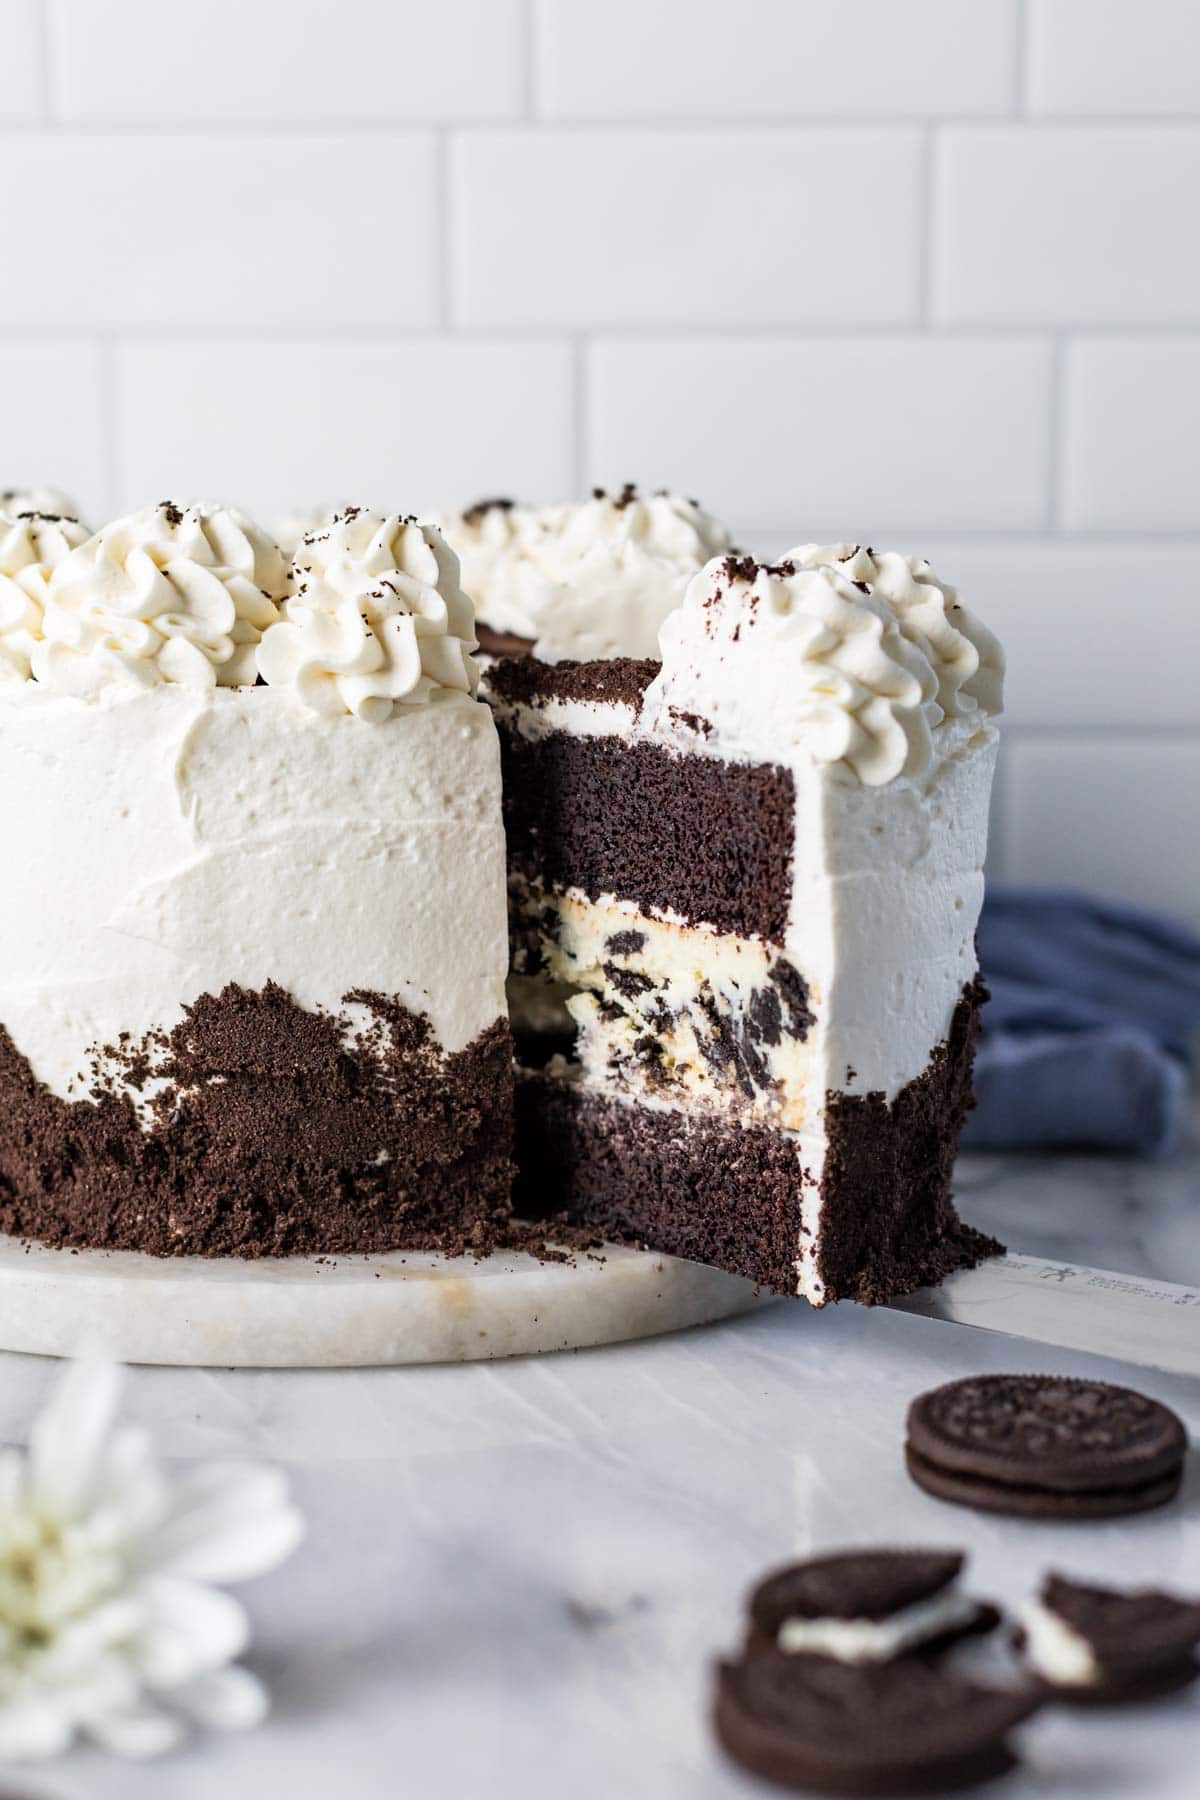 Slice of cake being cut from an oreo cheesecake cake.